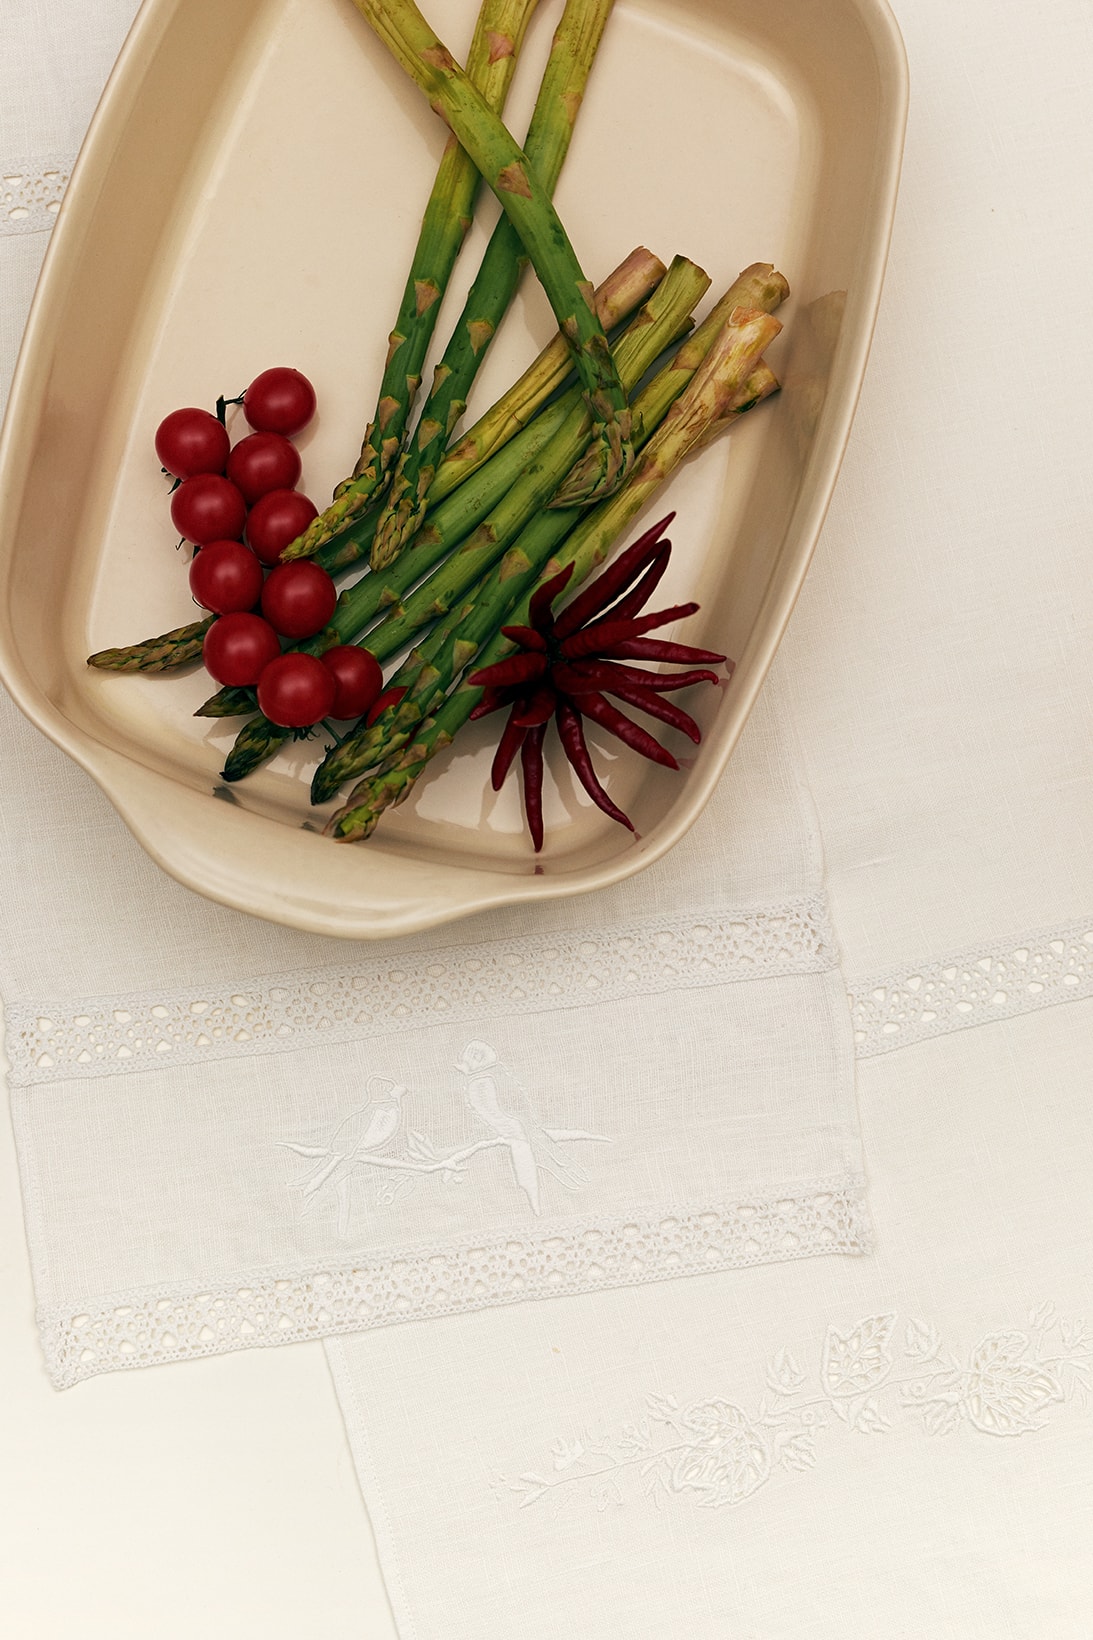 sleeper home homeware decor collection dish plate table cloth white asparagus tomatoes